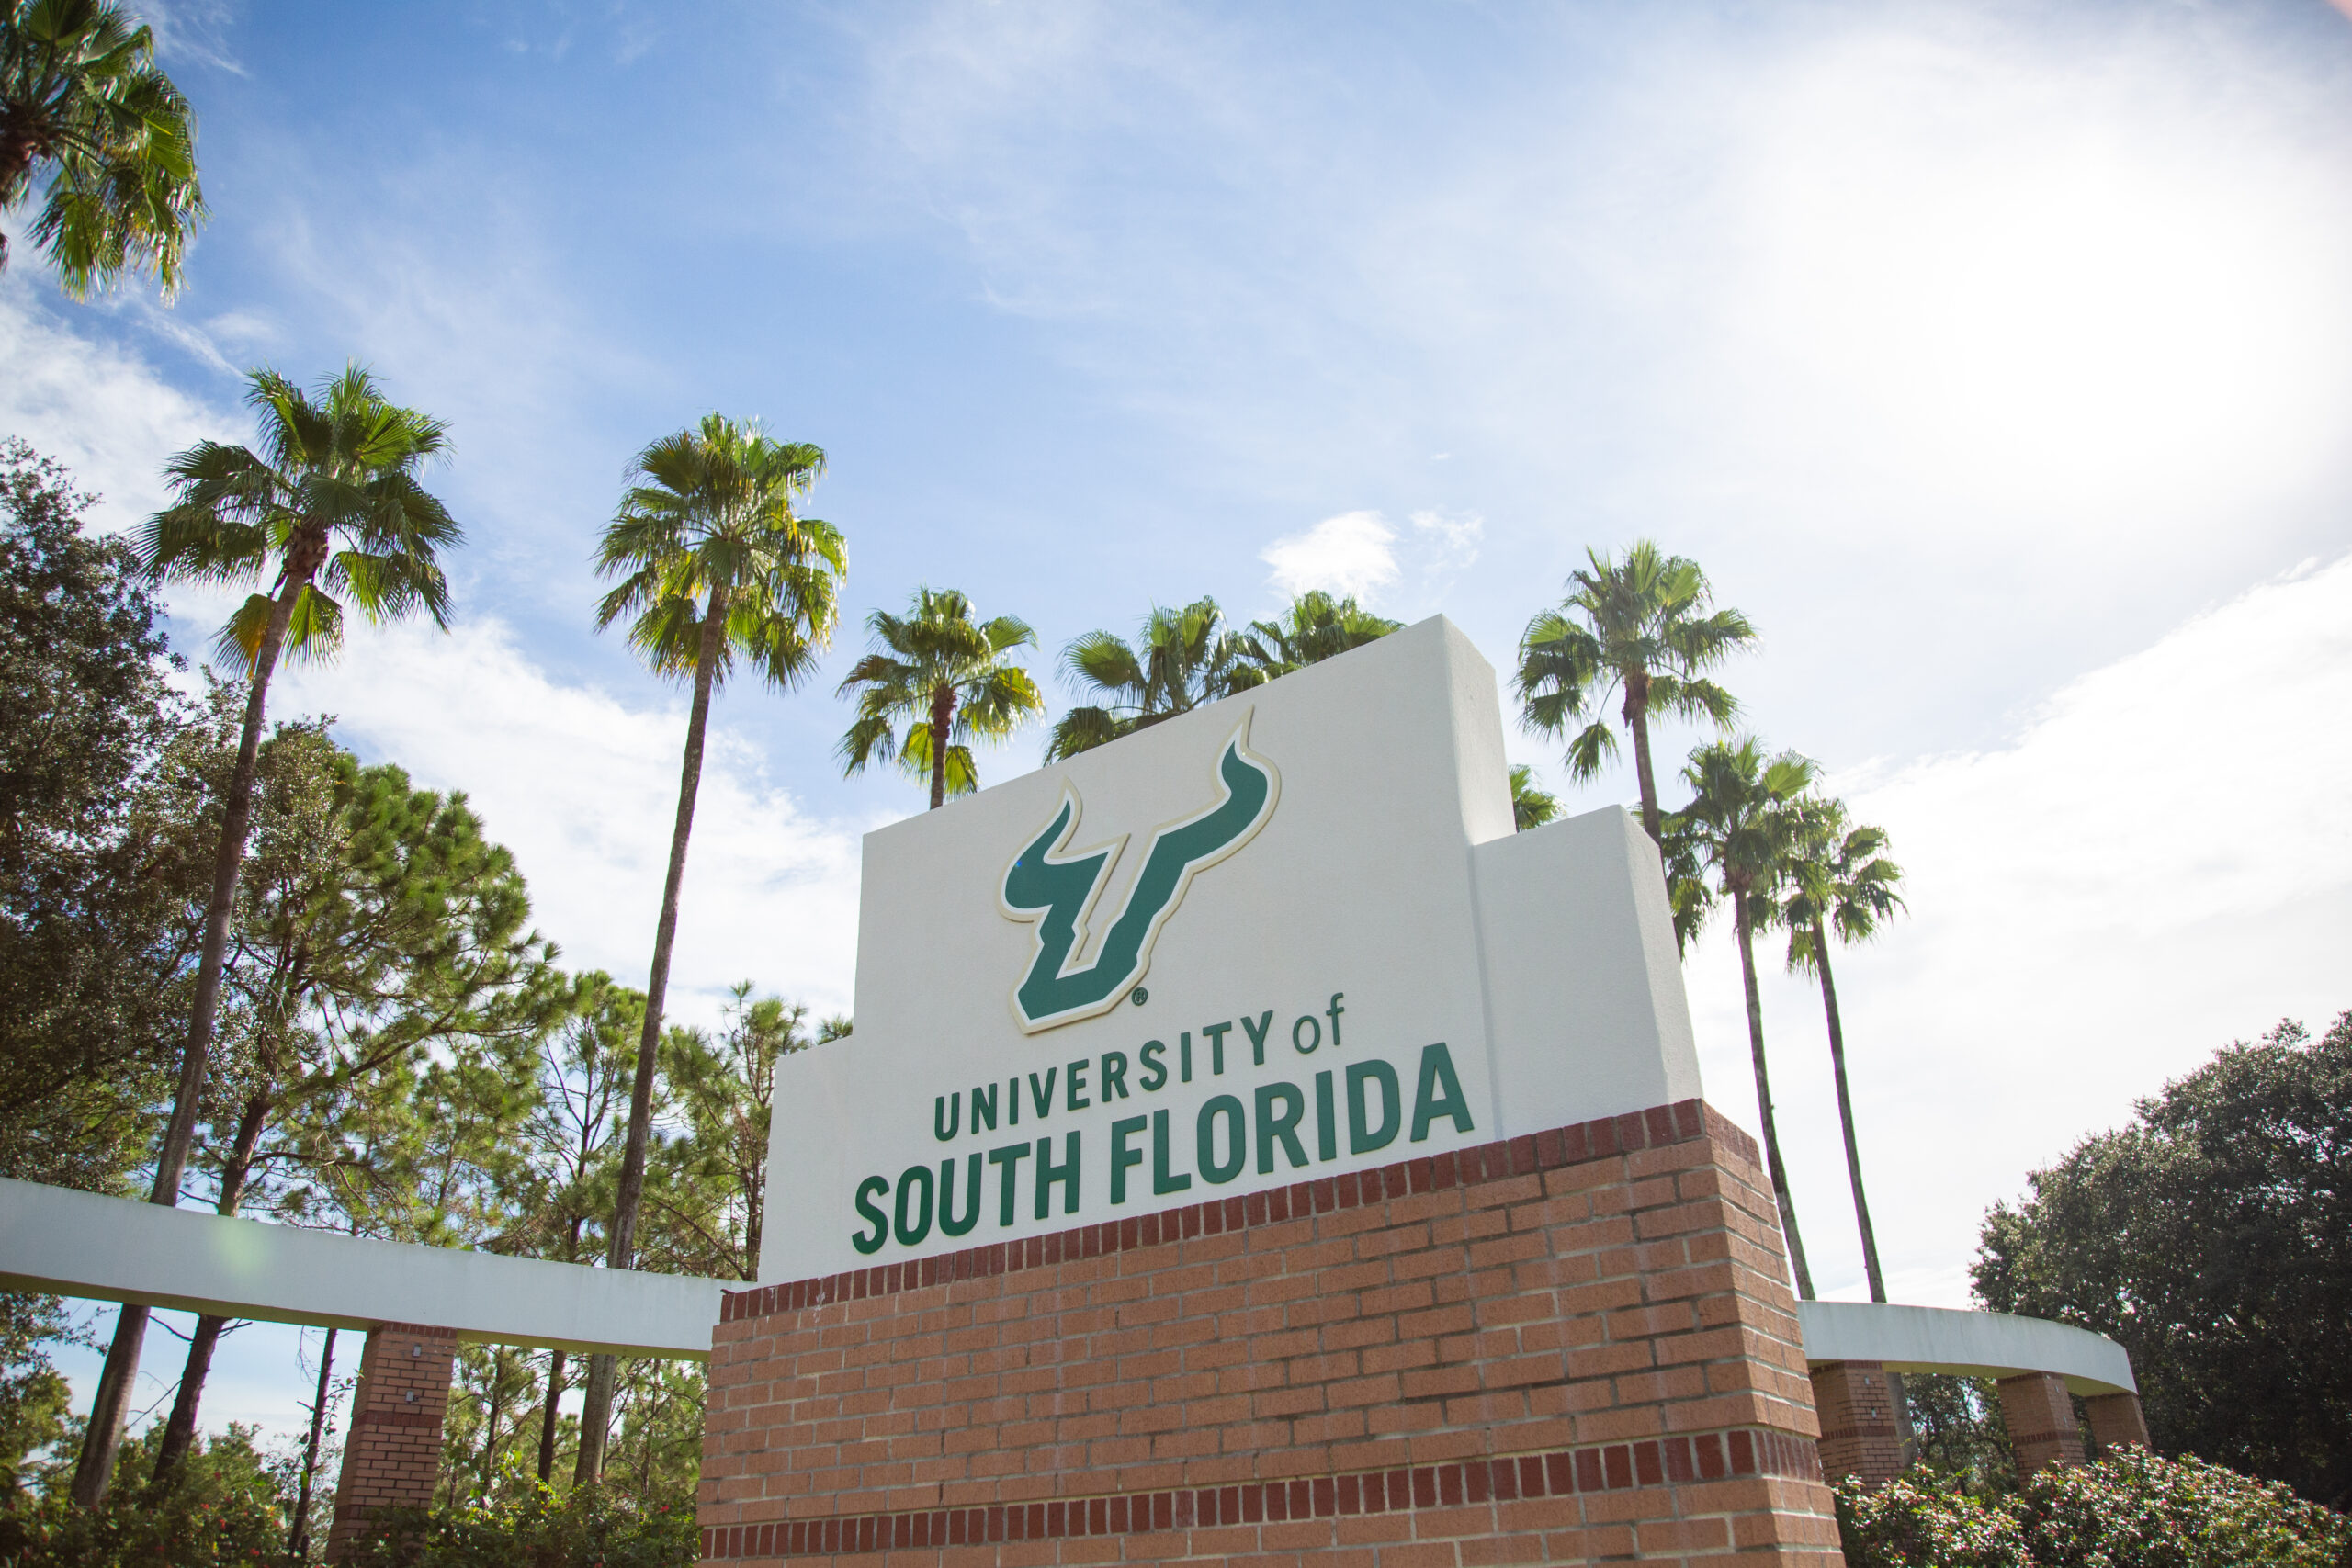 SACSCOC site visit begins assessing USF’s accreditation compliance